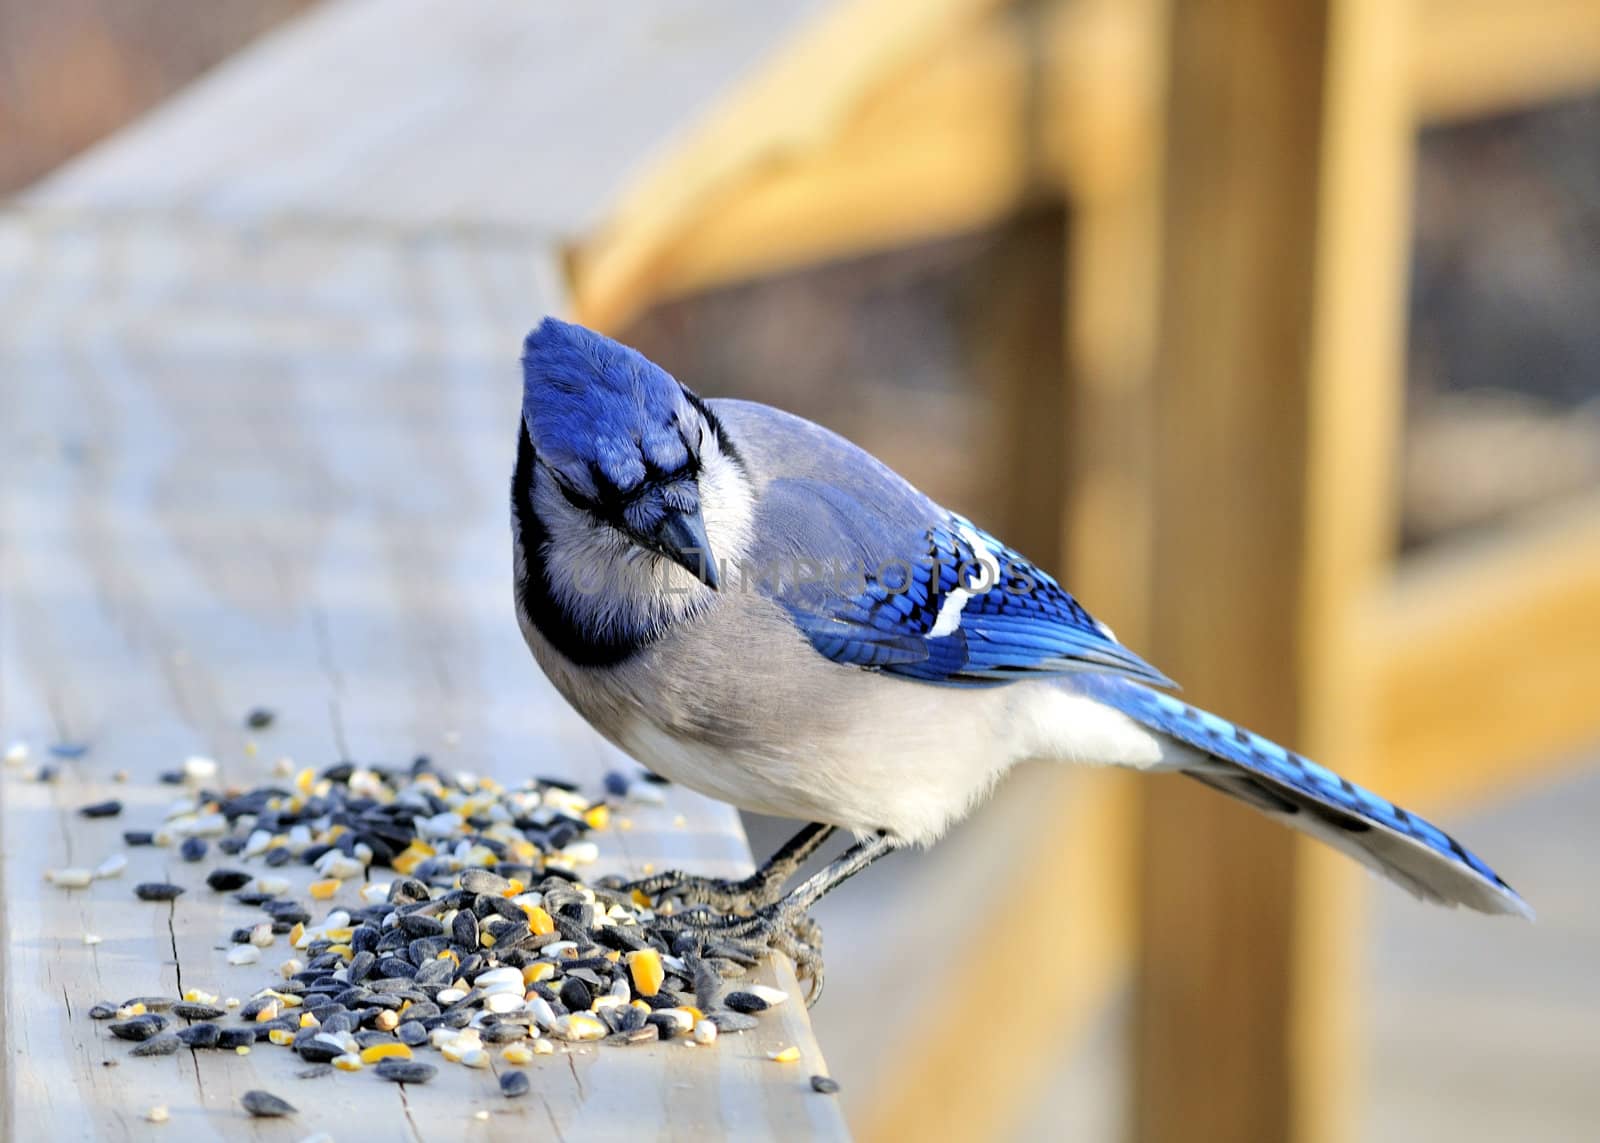 A blue jay perched on a wooden railing with bird seed.